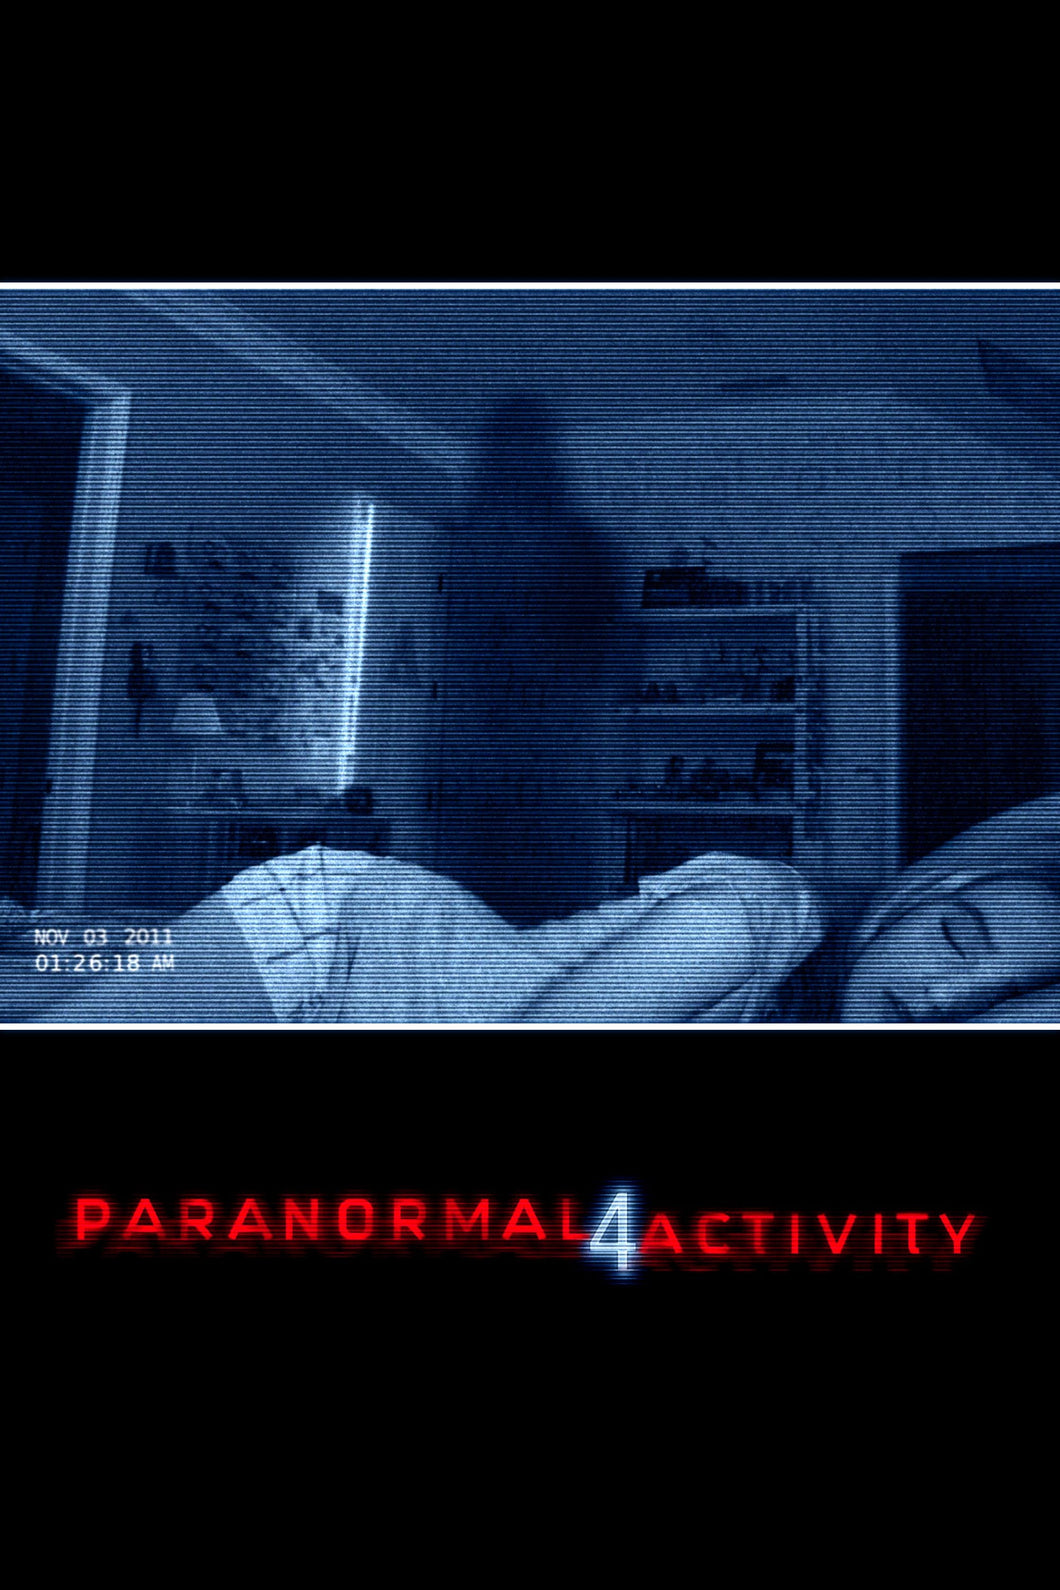 Paranormal Activity 4 Movie Poster High Quality Glossy Paper A1 A2 A3 A4 A3 Framed or Unframed!!!